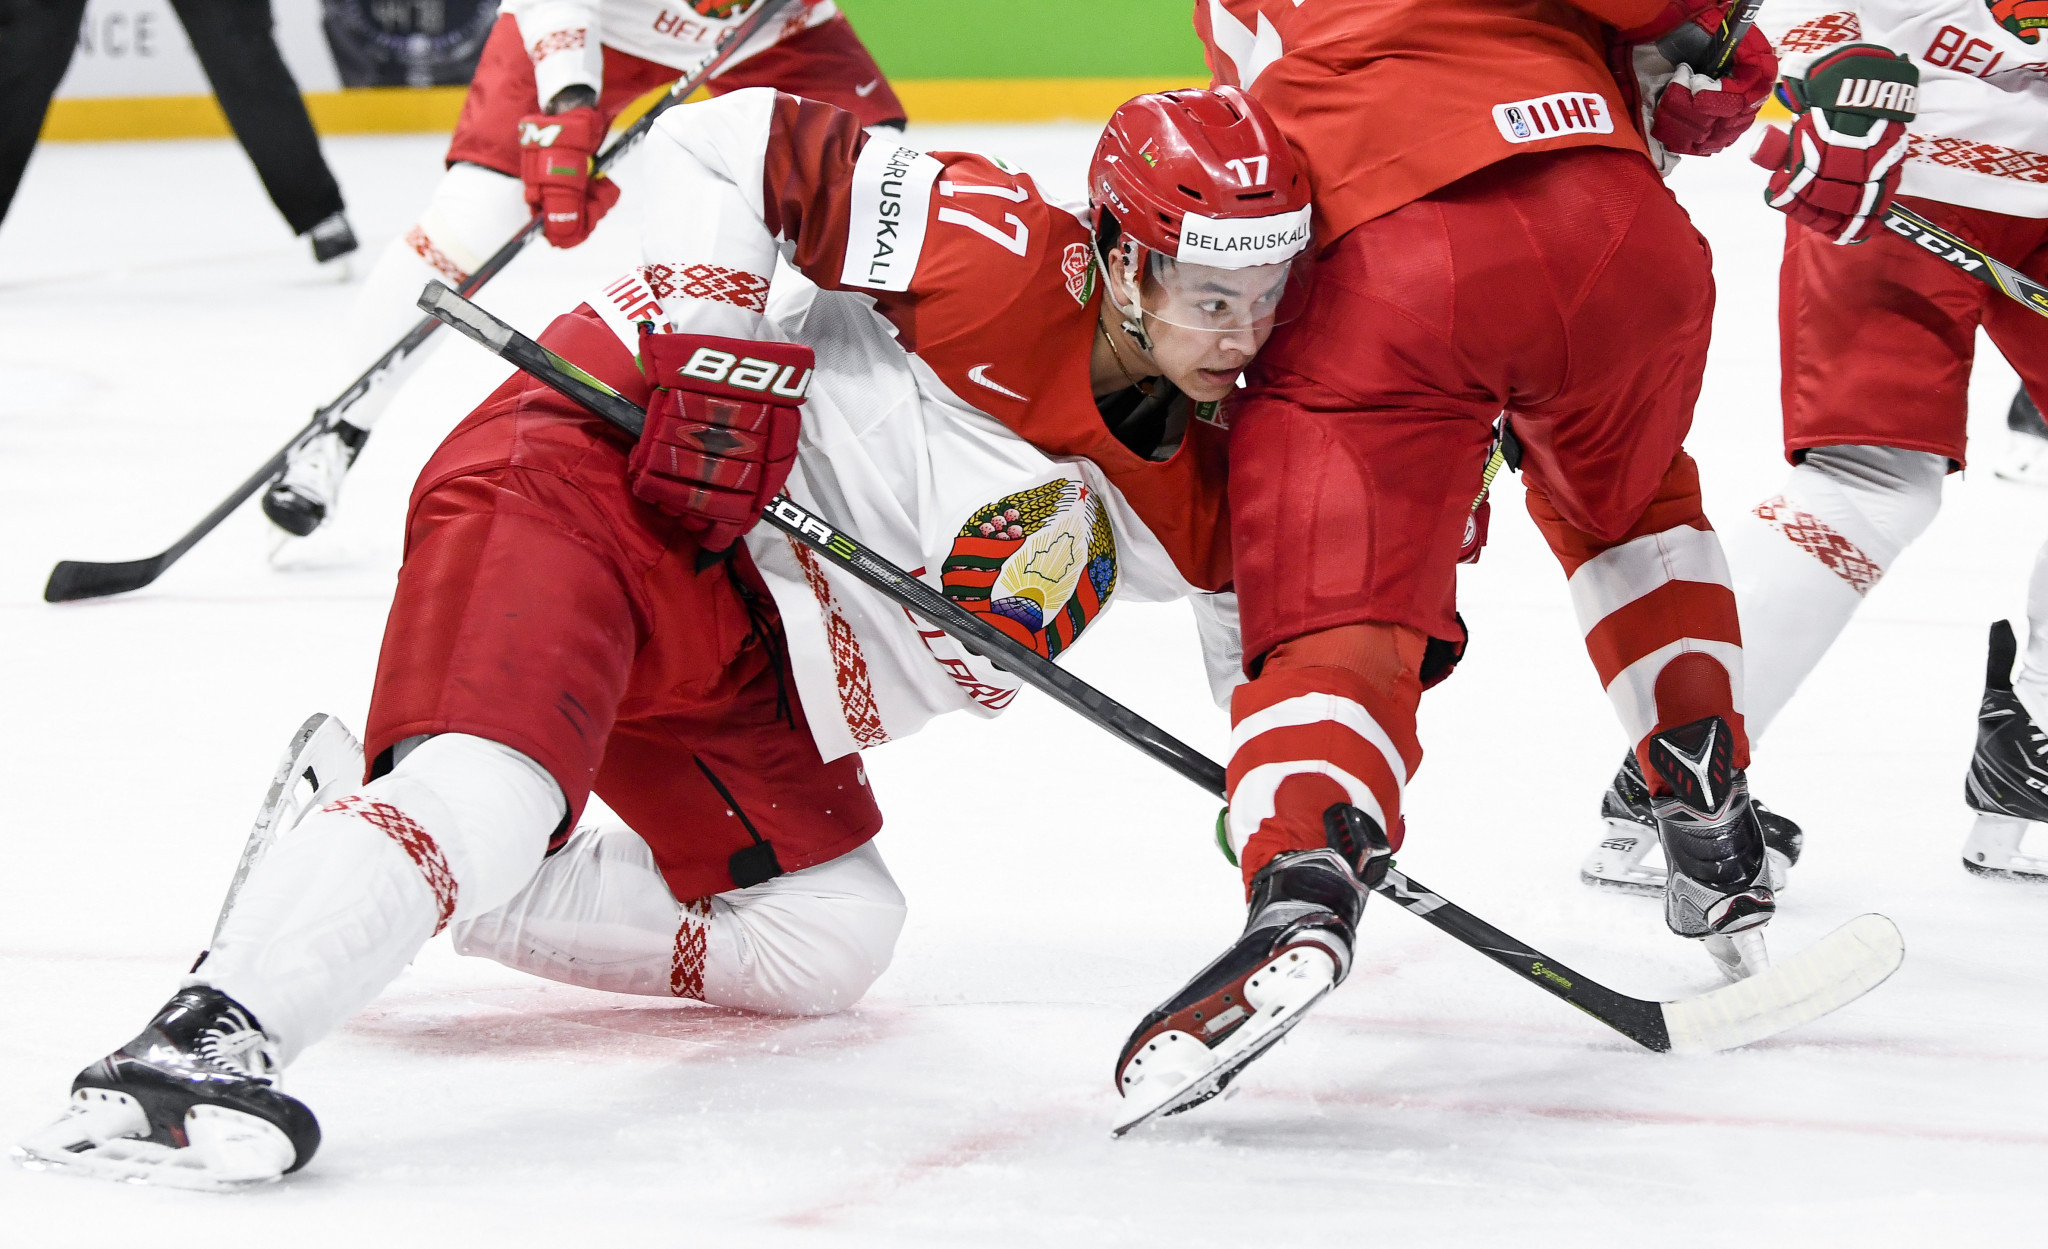 Belarus were relegated from the top division of the IIHF World Championship in May ©Getty Images